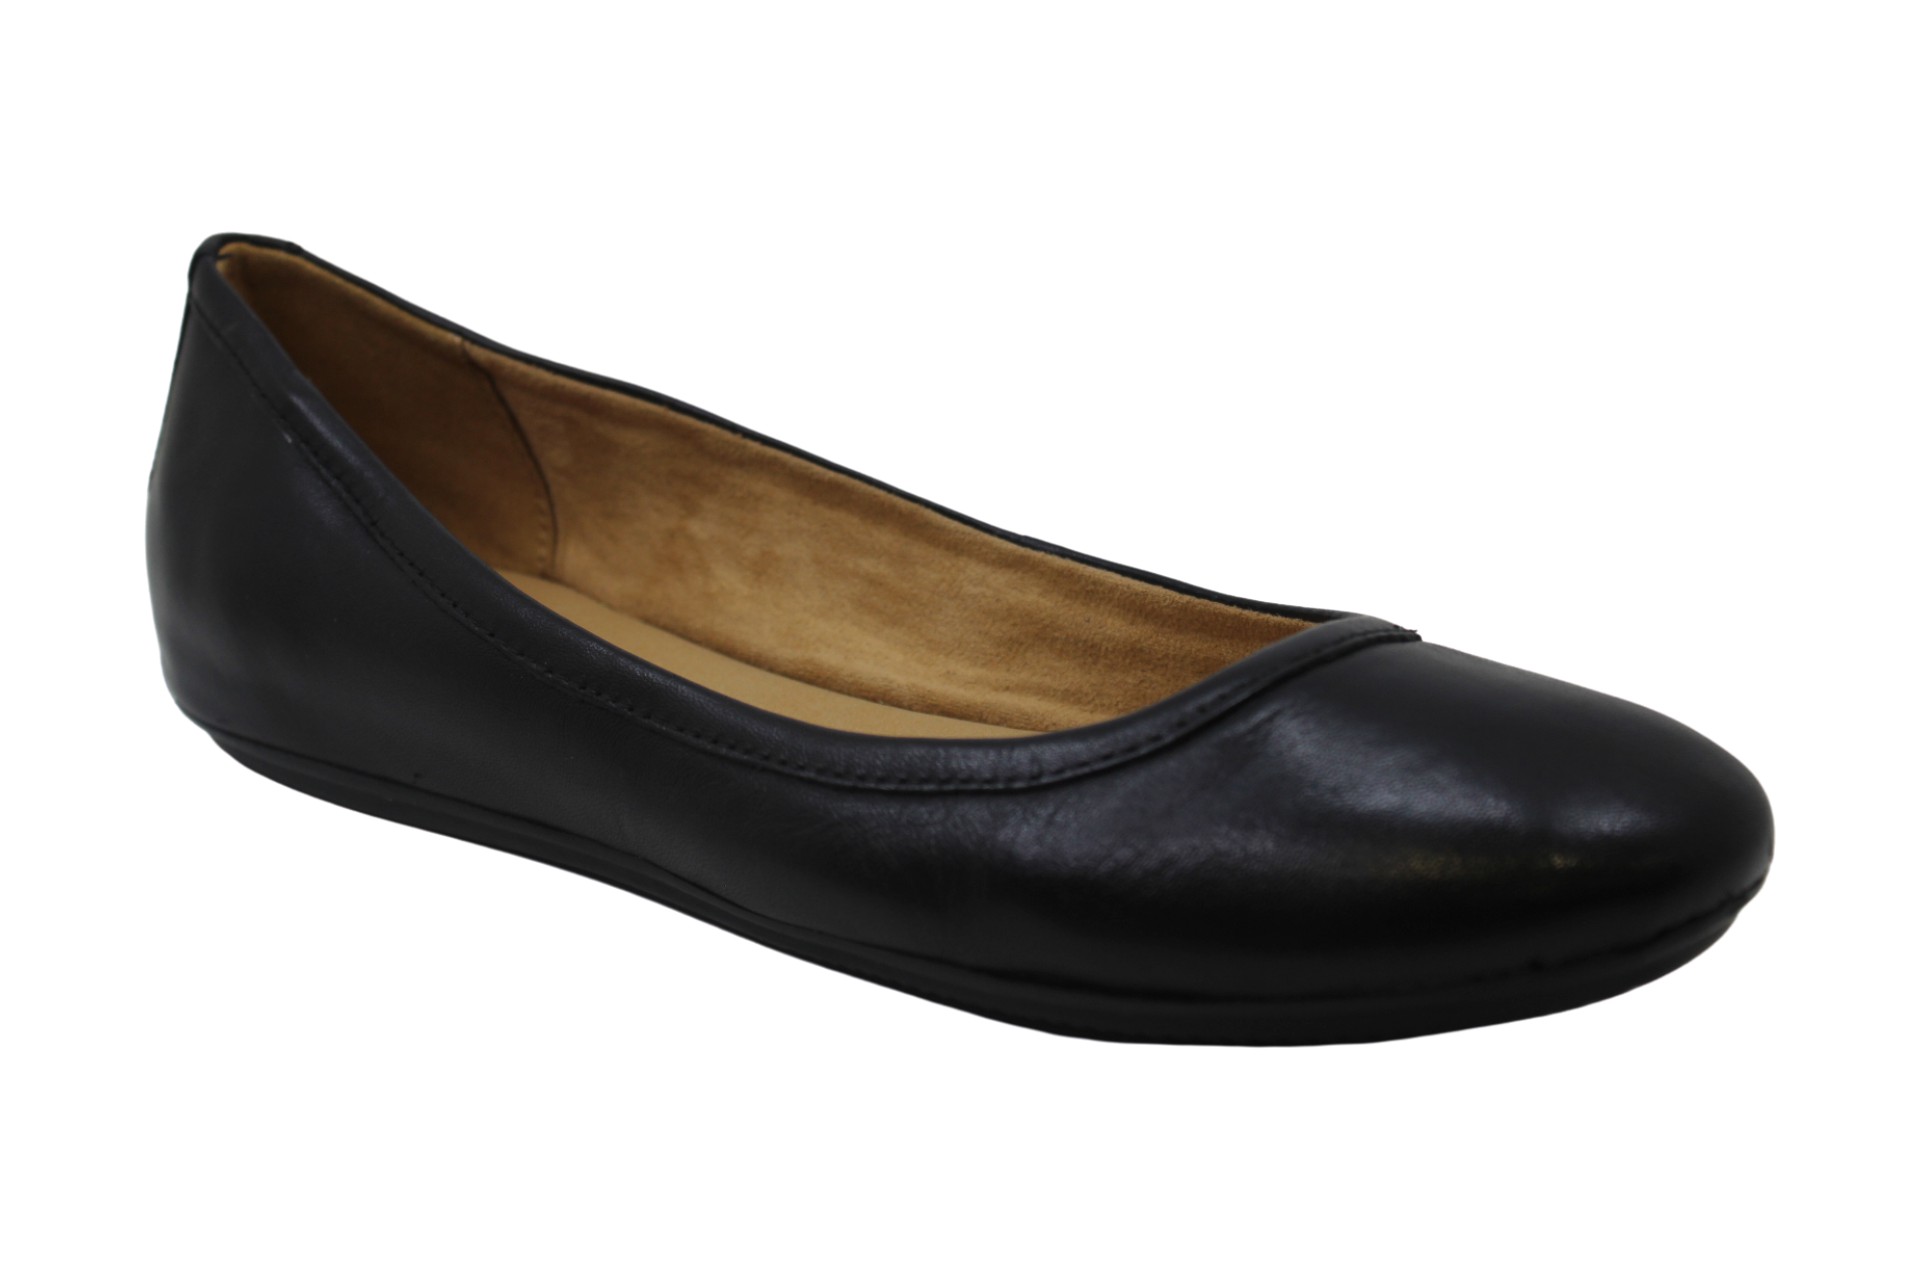 Naturalizer Womens Flats in Black Color, Size 8 YLR | eBay